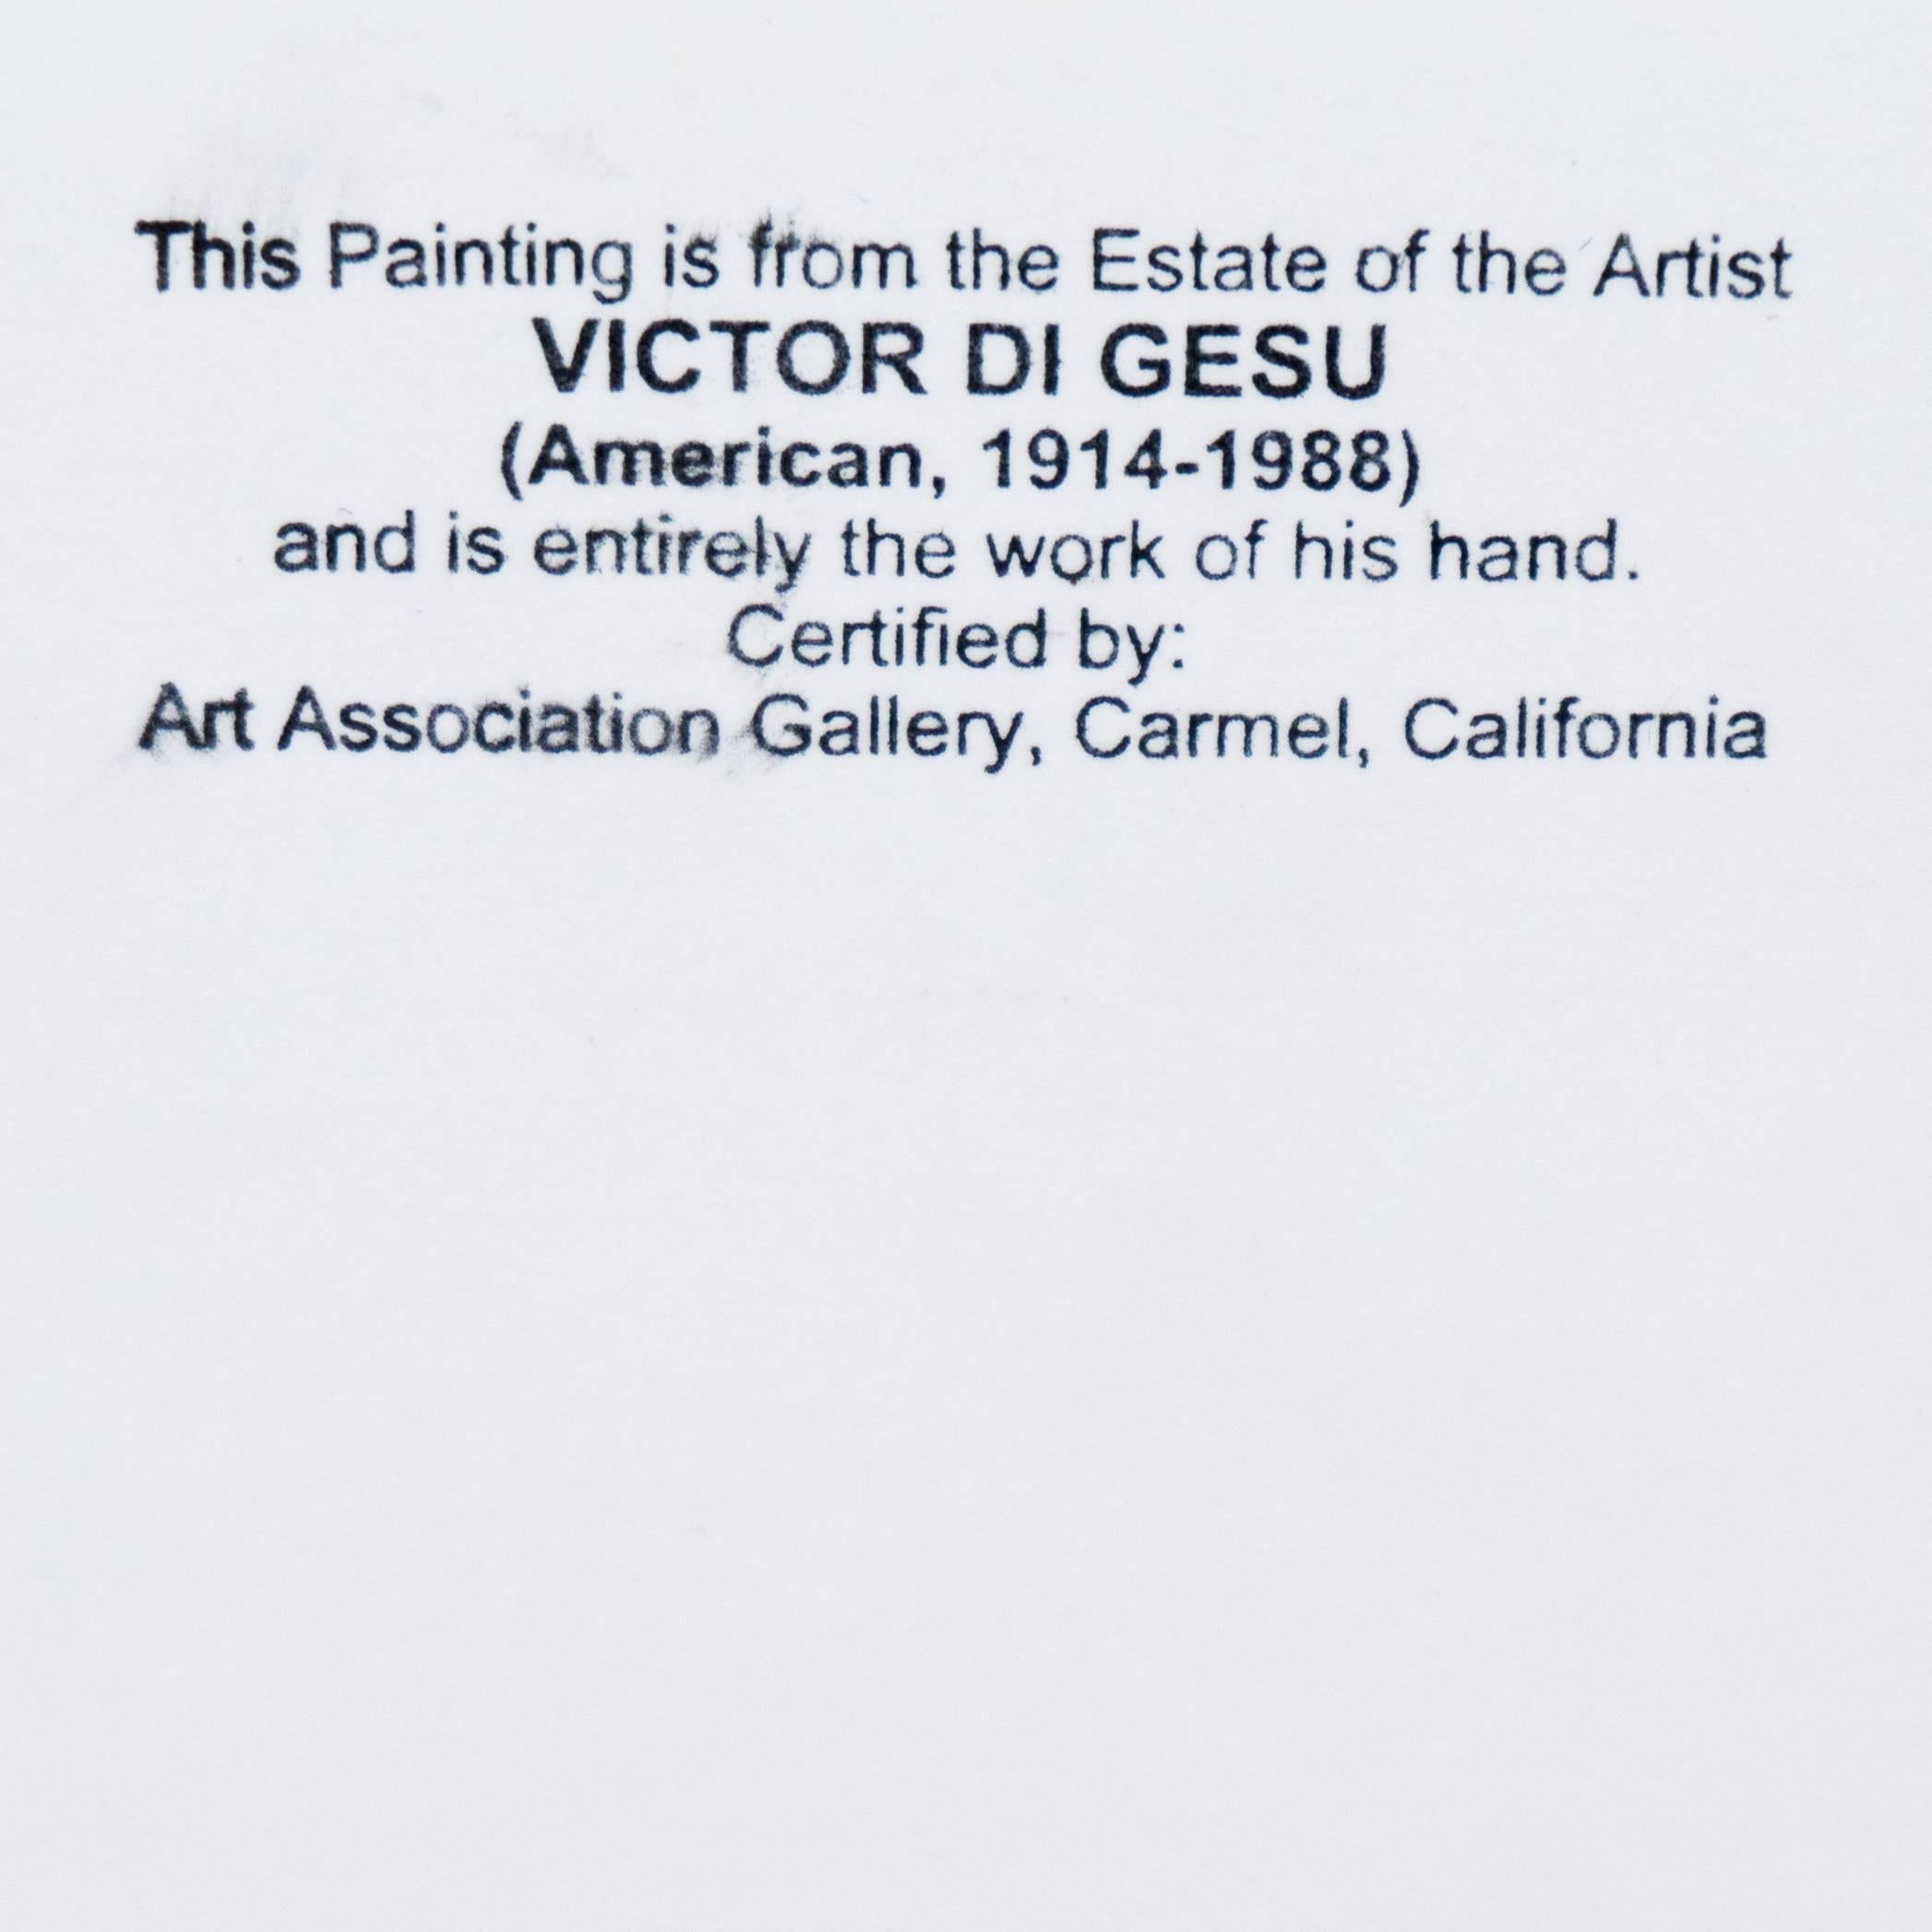 Painted circa 1955 by Victor Di Gesu, (American, 1914-1988) and stamped verso with Victor Di Gesu Estate stamp.

Winner of the Prix Othon Friesz, Victor di Gesu first attended the Los Angeles Art Center and the Chouinard Art School before moving to